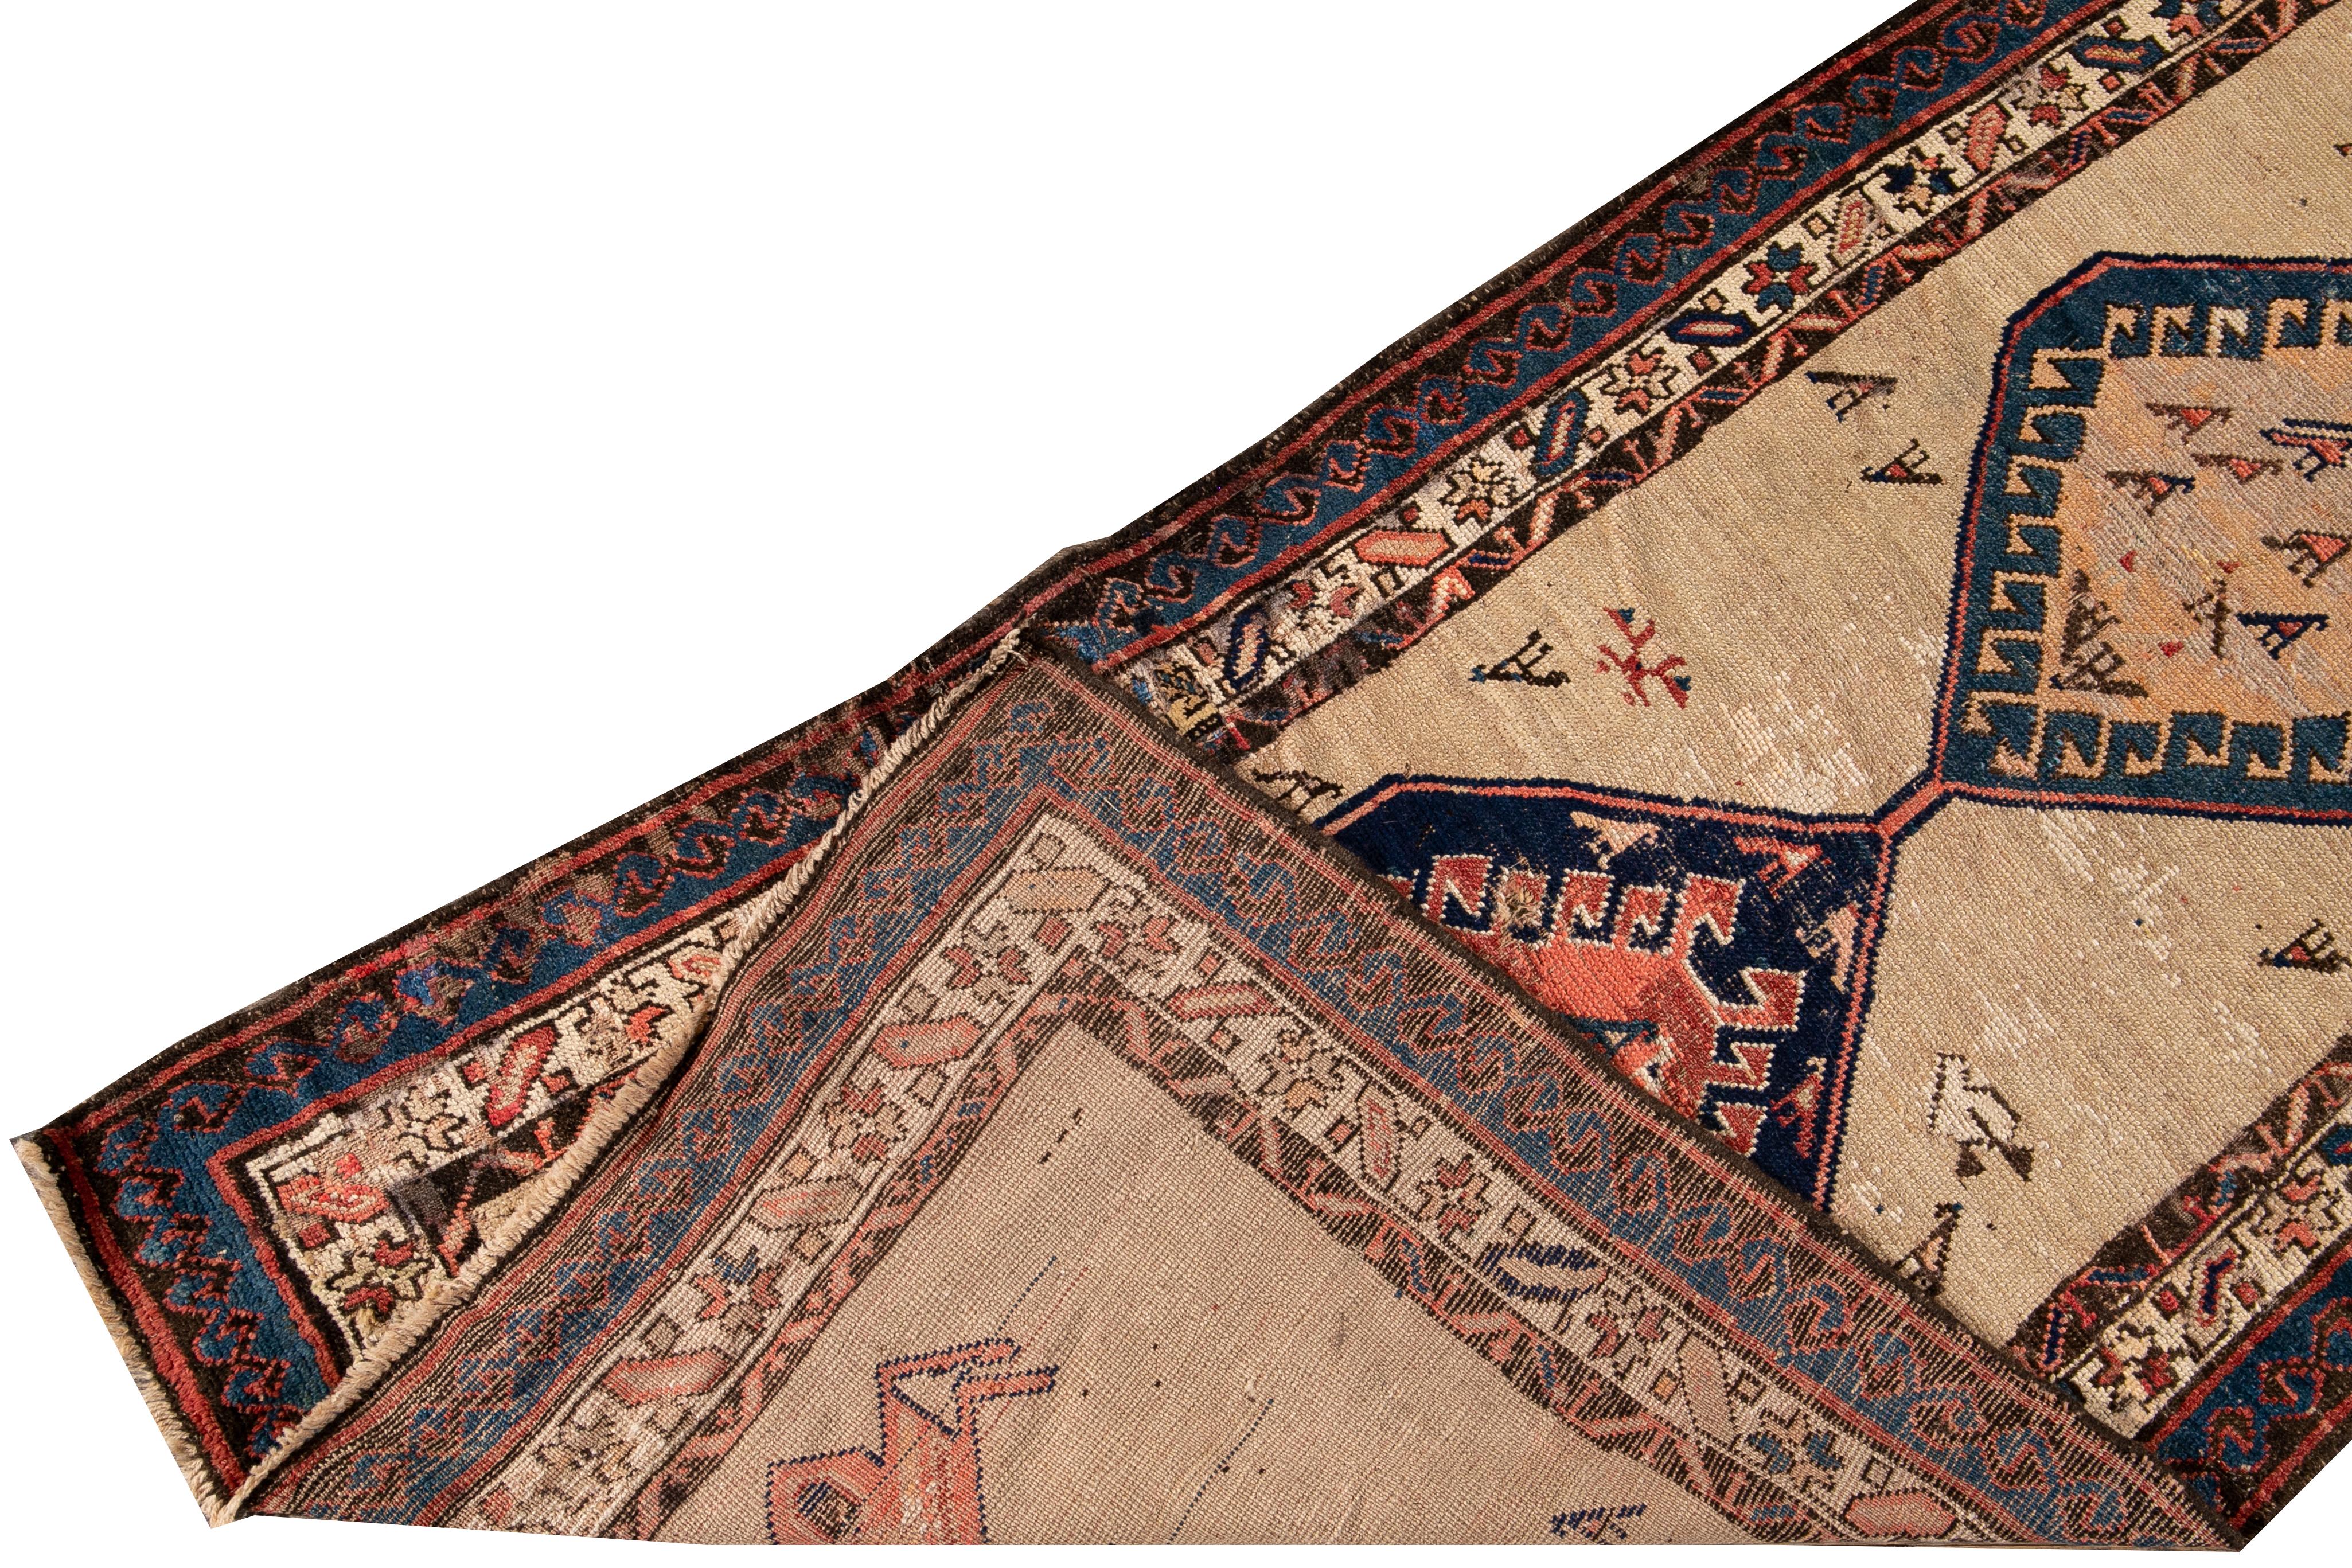 Beautiful antique Serab hand-knotted wool rug with a beige field. This Persian rug has a navy-blue frame and brown, rust, and peach accents in a gorgeous all-over geometric medallion design.

This rug measures: 2'10